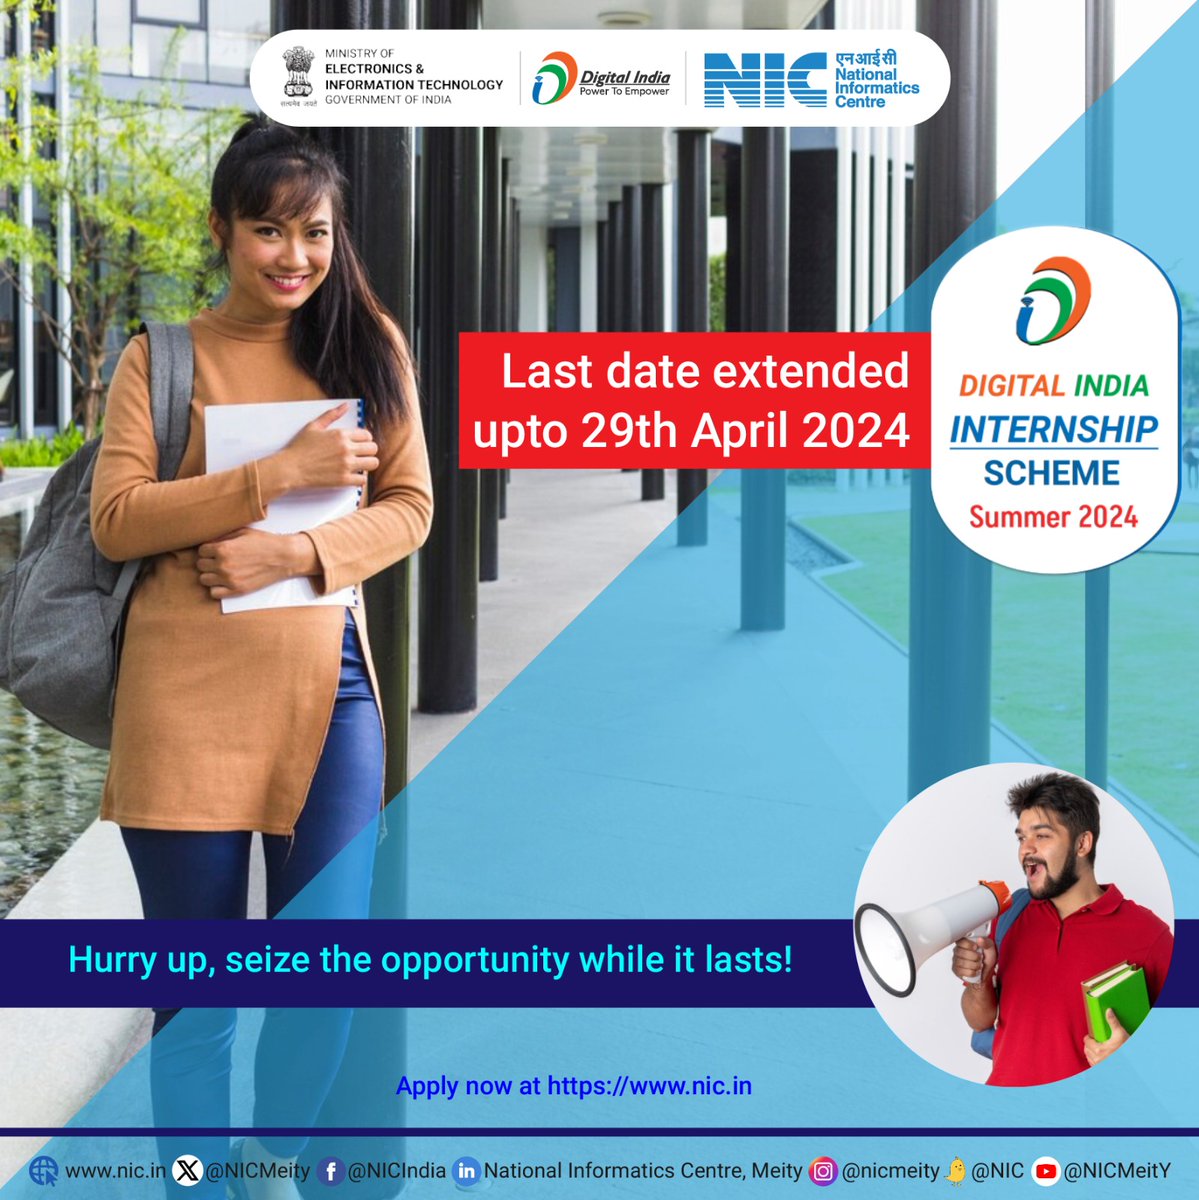 #DigitalIndia #Internship Scheme 2024!

Last date to apply is extended till 29th April, 2024.
Don't miss the opportunity now. 

Apply soon for great learning experiences.  

For more details, visit nic.in

#NICMeitY #summerinternship #DigitalTransformation